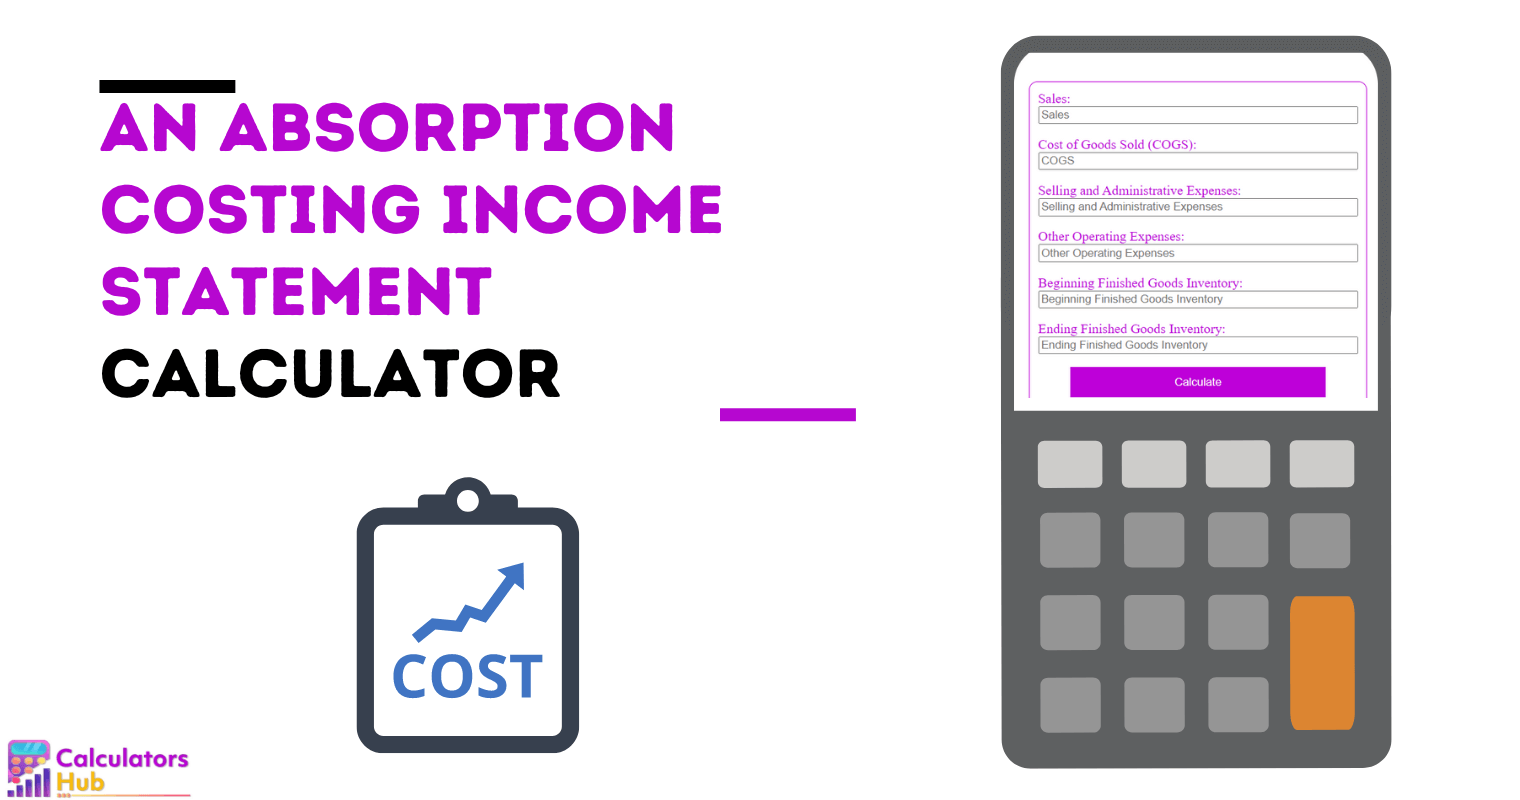 An Absorption Costing Income Statement Calculator